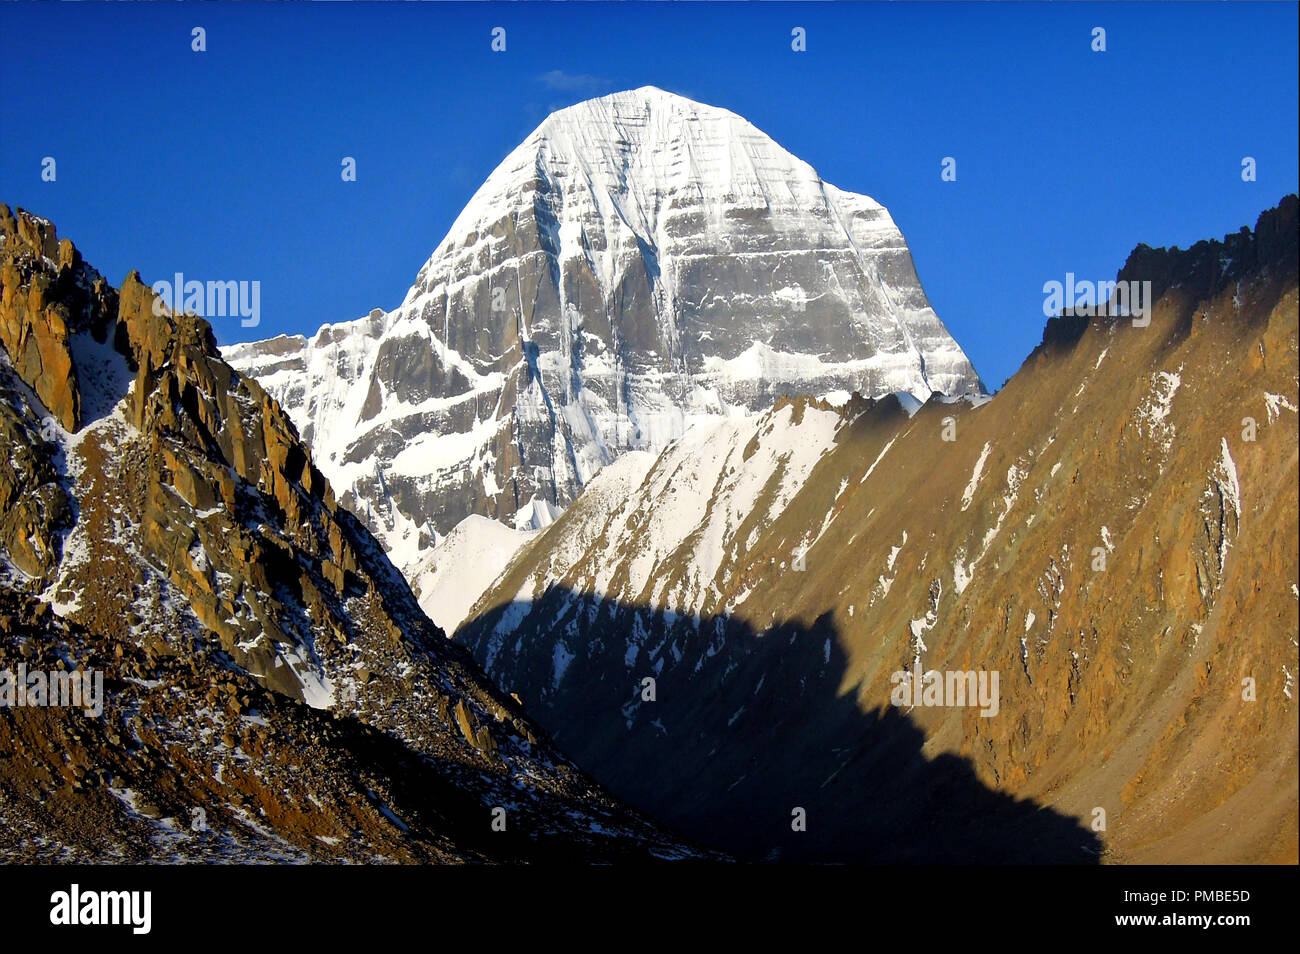 Mount Kailash, Tibet, China, Holy Mountain, Center of the Universe, Spiritual Power Place, Pilgrimage Destination for Buddhists and Hindus Stock Photo